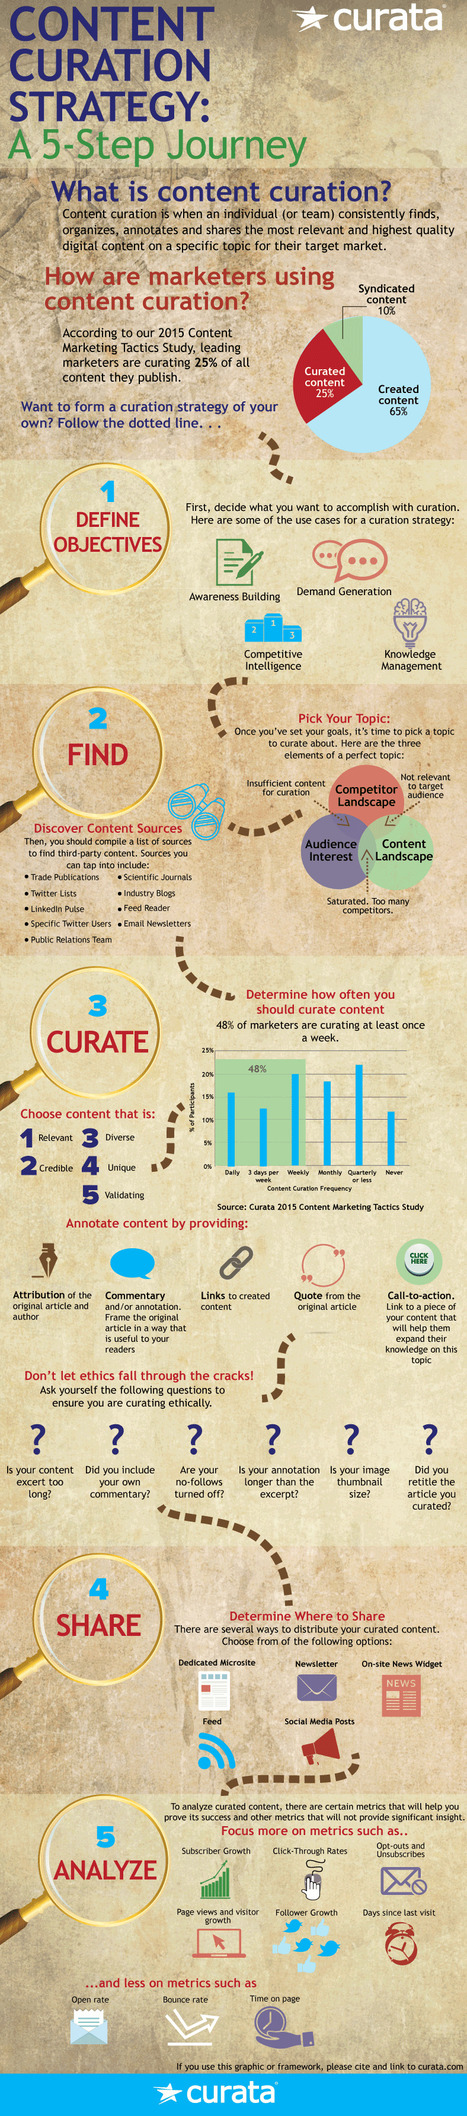 Content Curation Strategy: A 5-Step Journey #Infographic #contentcuration #marketing | social media useful  tools | Scoop.it